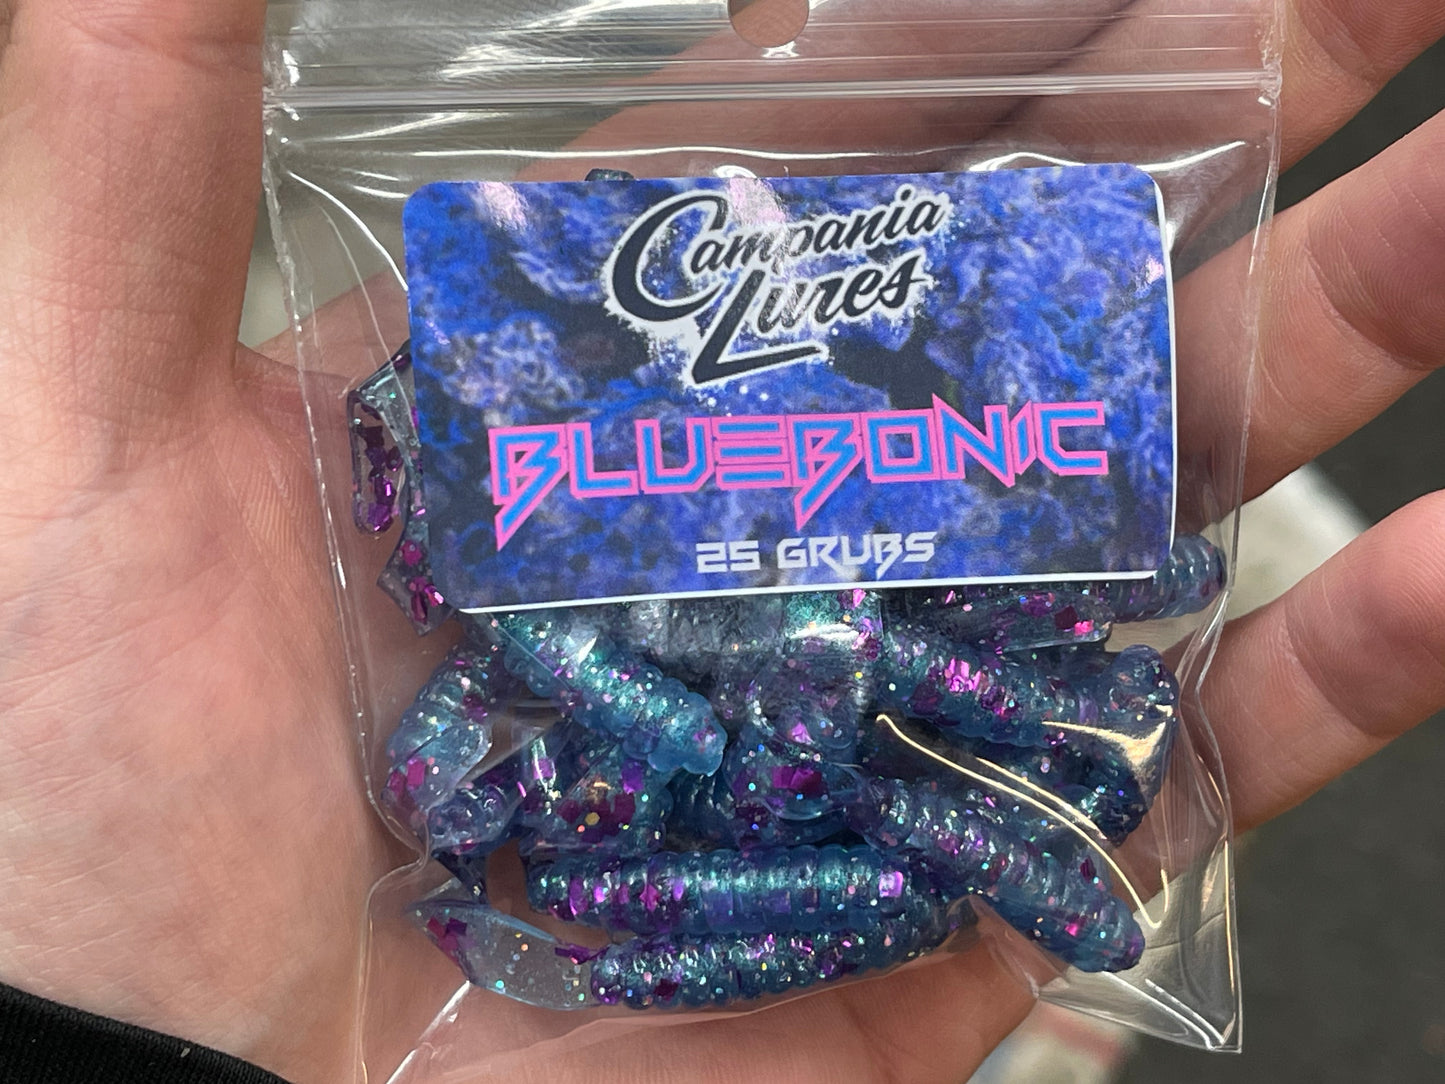 Limited One Time Run Bluebonic Grubs. 25 pack